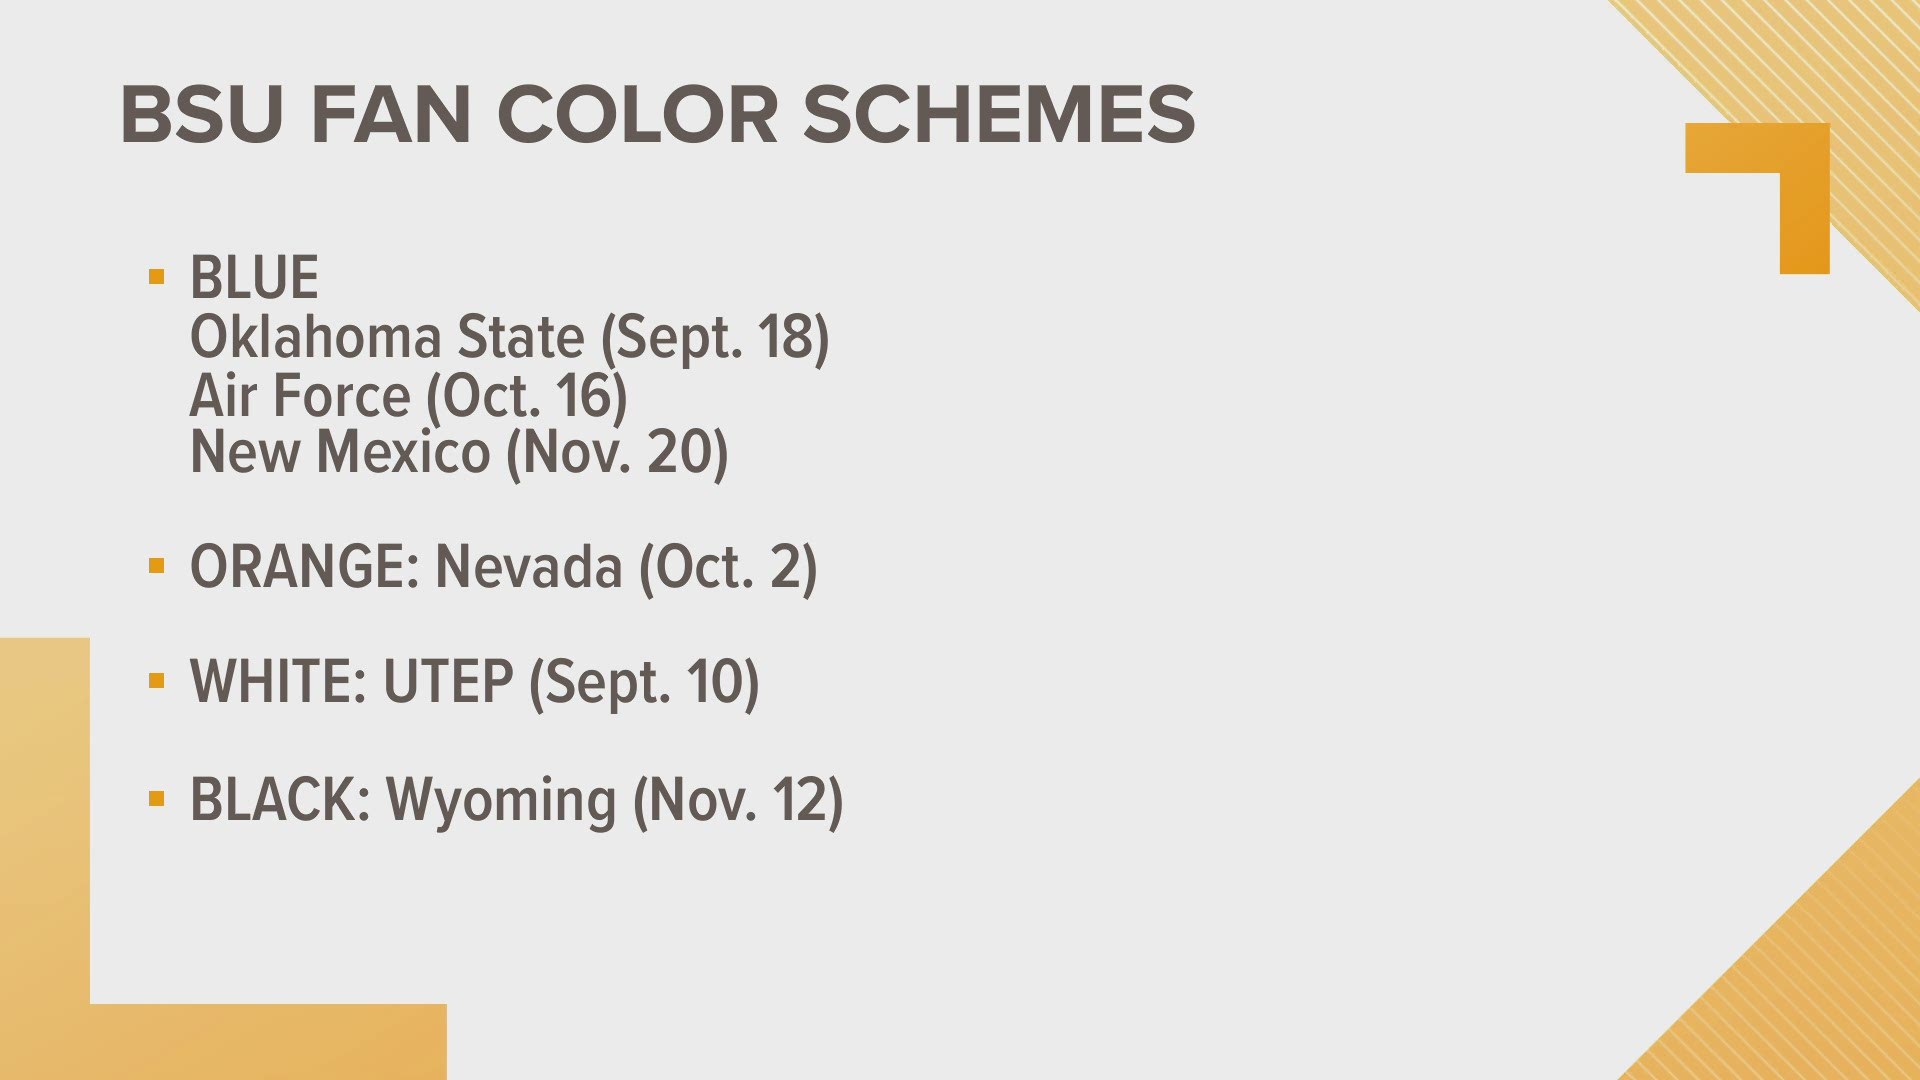 There will be six homes at Albertsons Stadium. Fans are be asked to wear a certain color to each game.